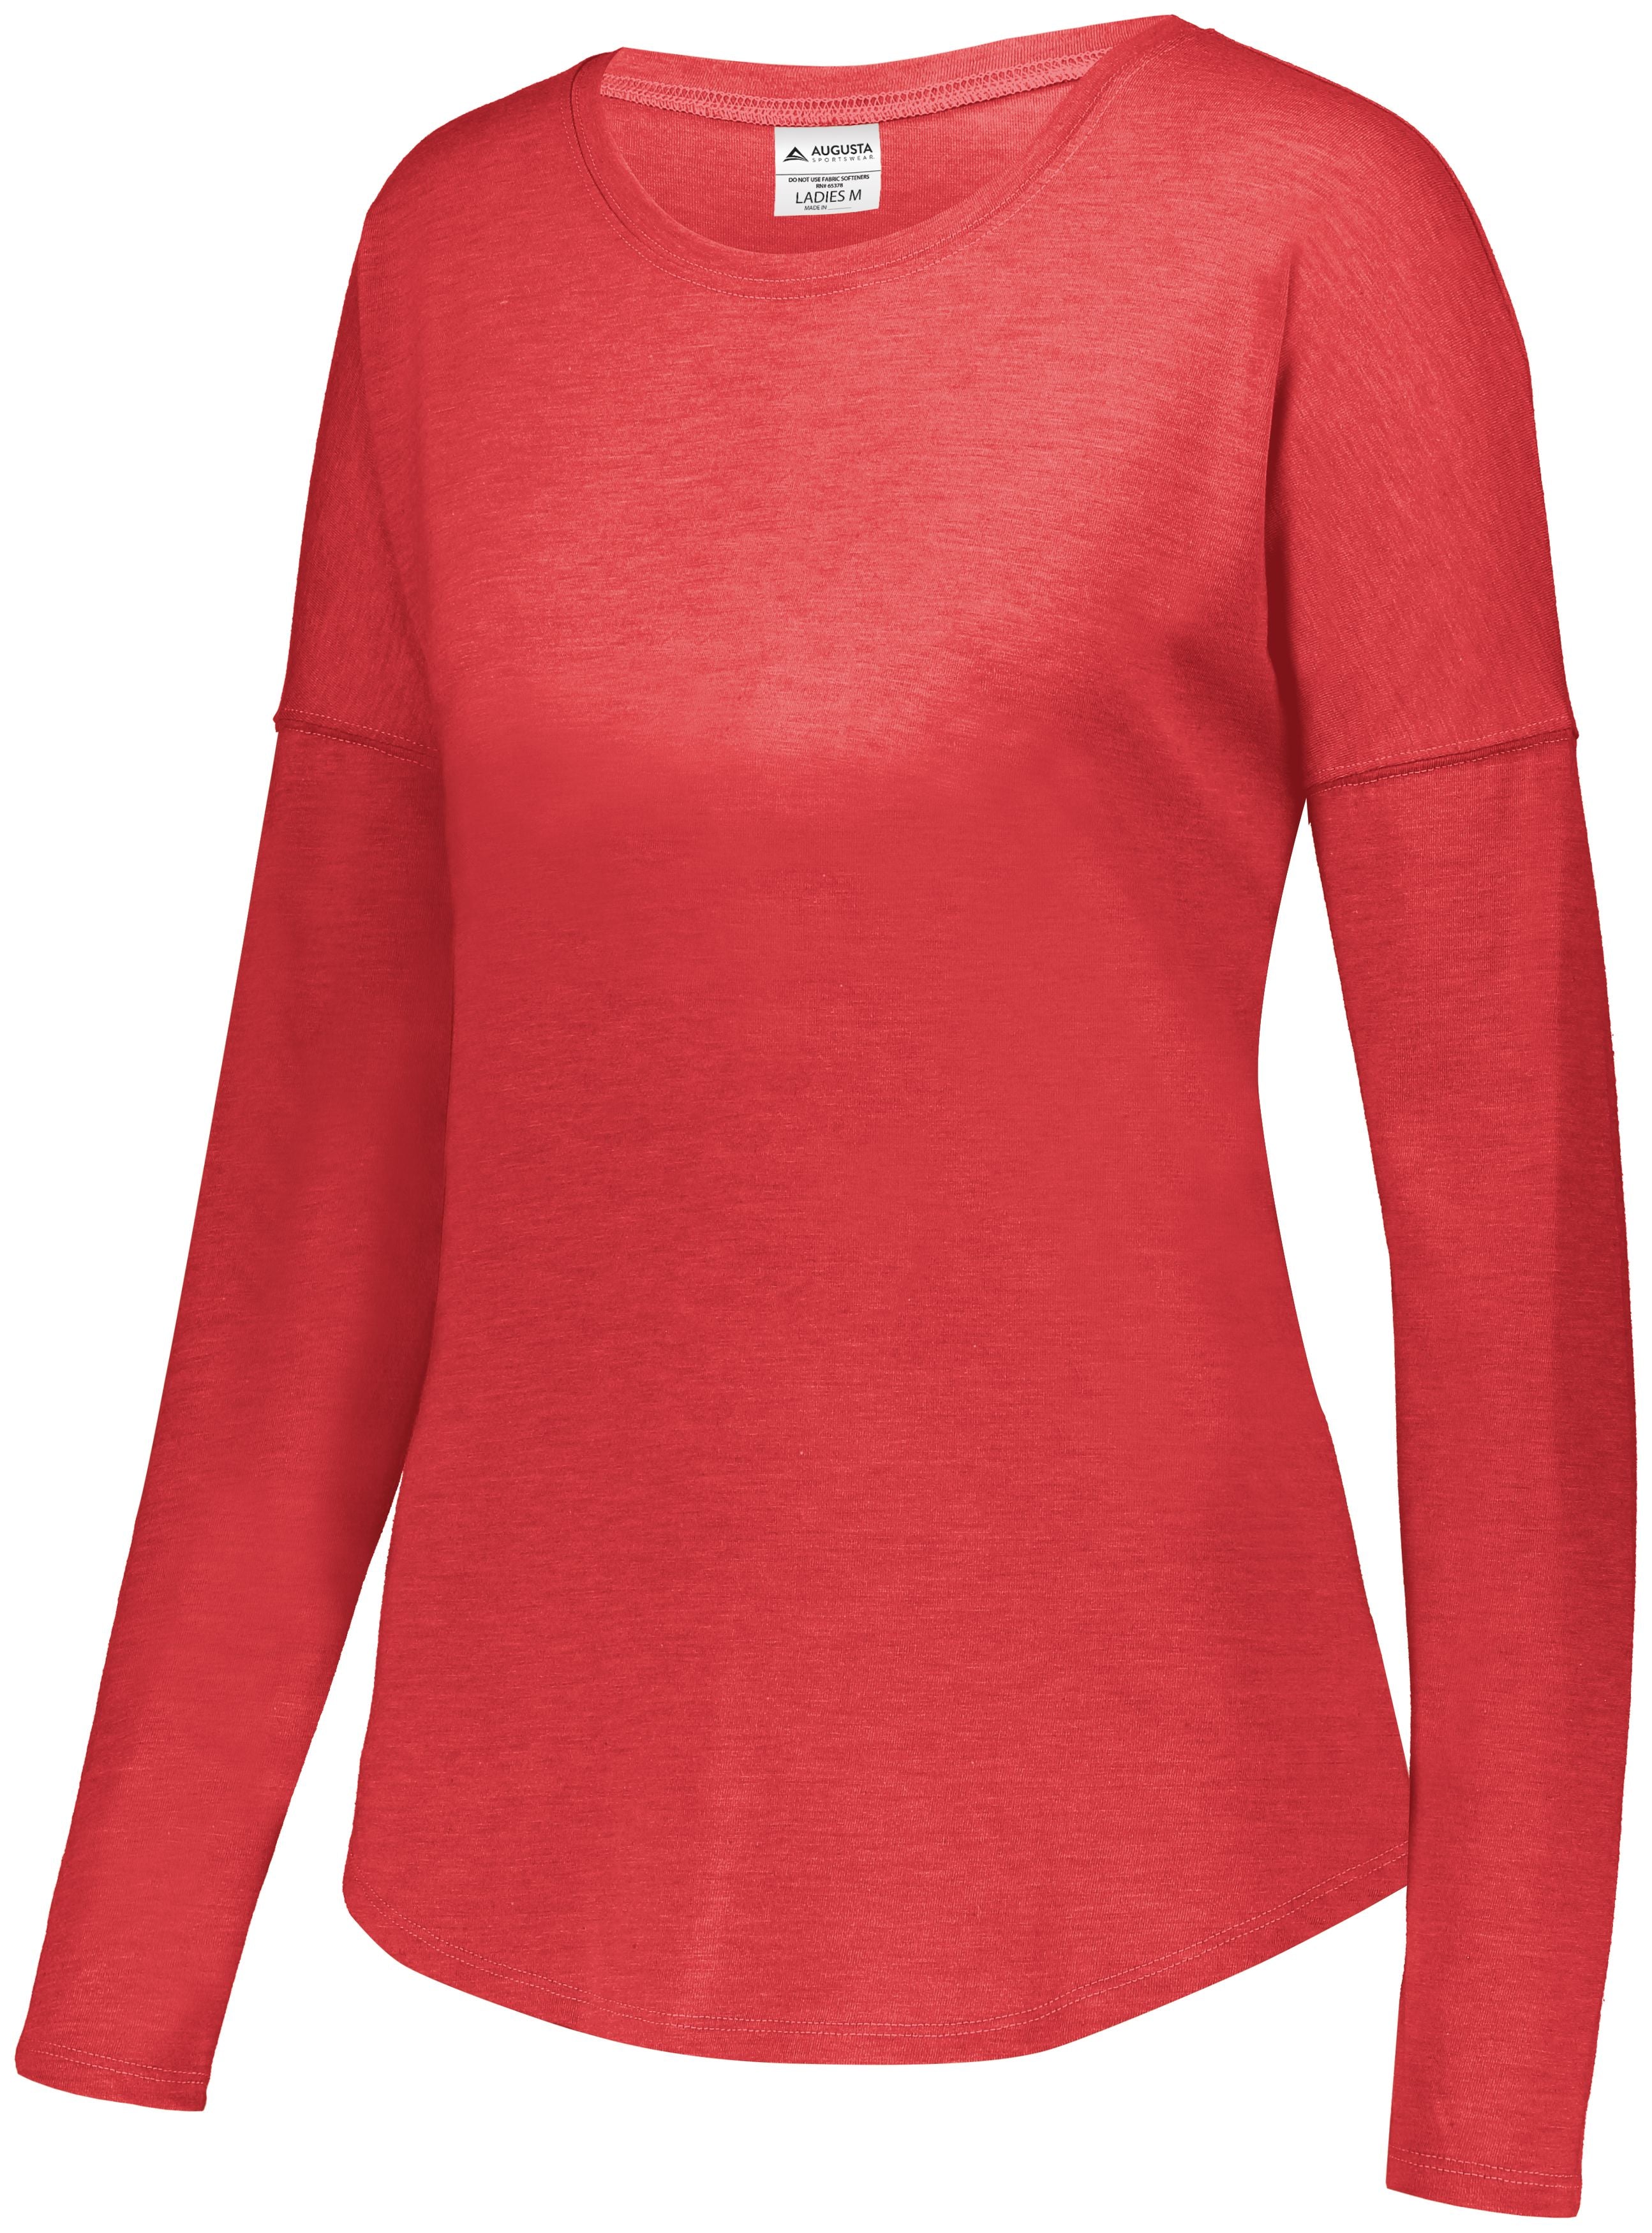 Augusta Sportswear Ladies Lux Tri-Blend Long Sleeve Shirt in Red Heather  -Part of the Ladies, Augusta-Products, Shirts product lines at KanaleyCreations.com